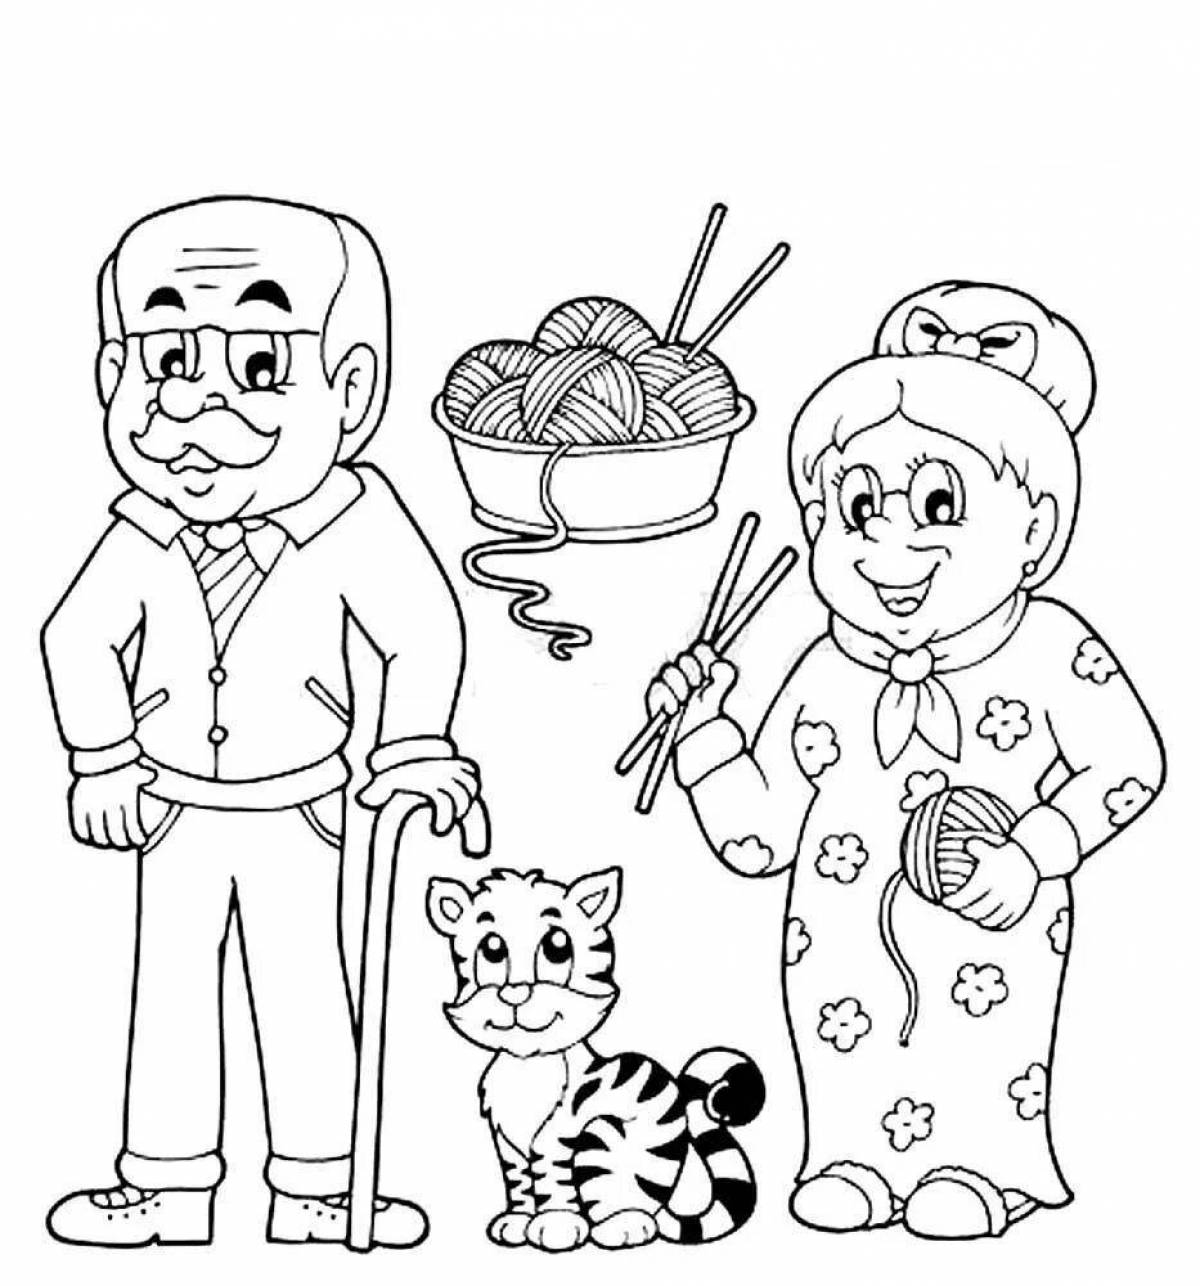 Coloring for grandparents and grandparents